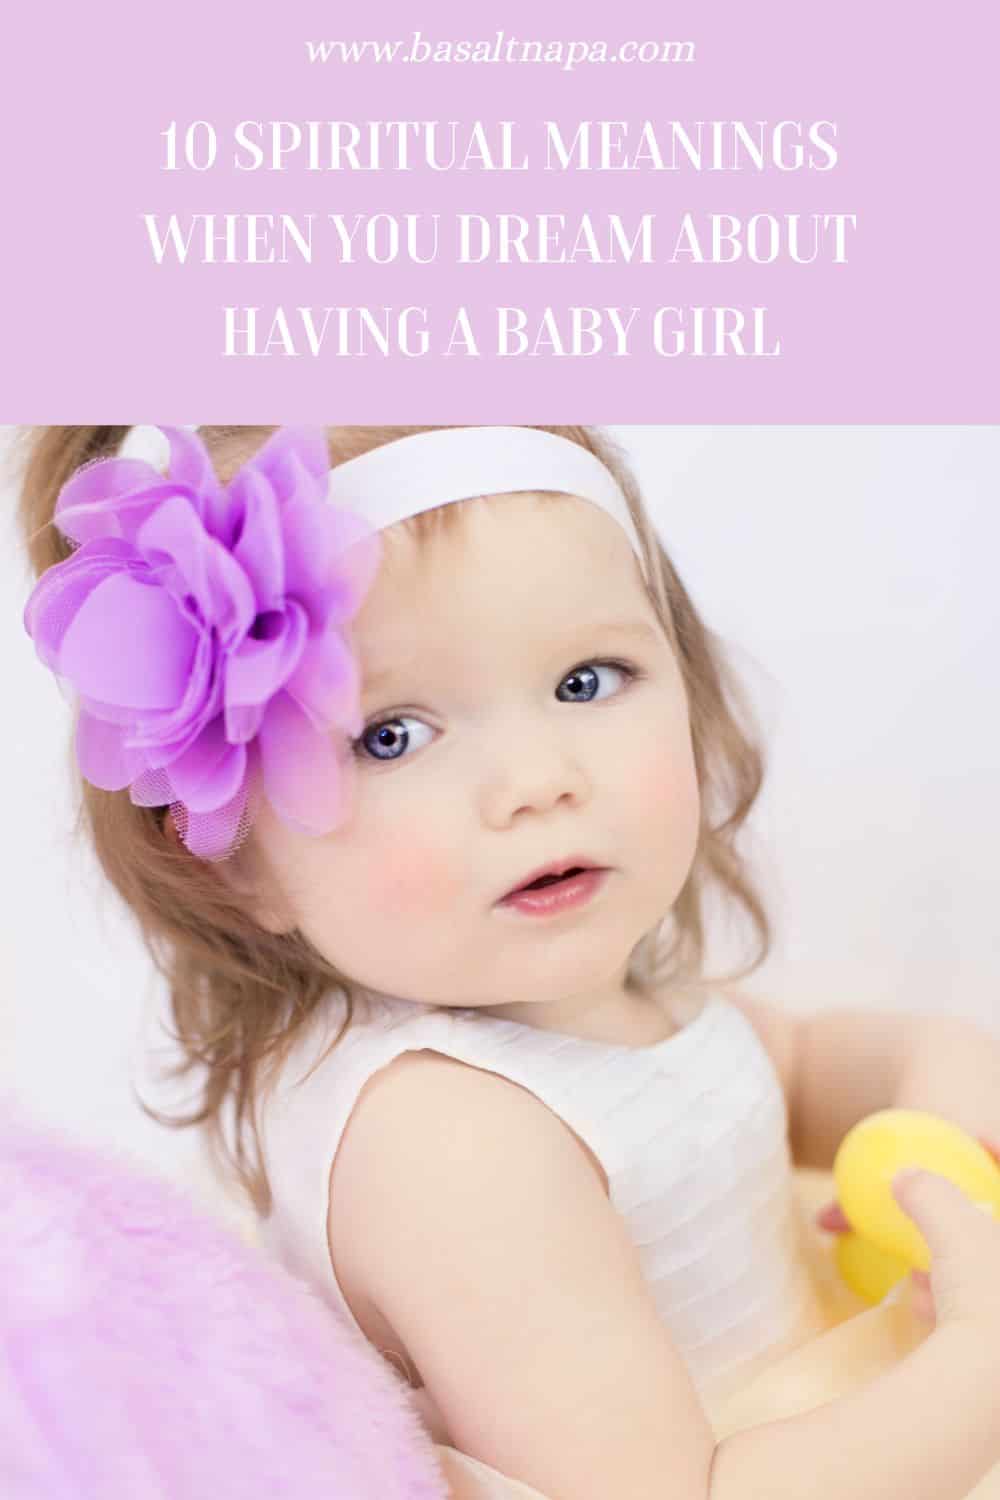 10 Spiritual Meanings When You Dream About Having A Baby Girl